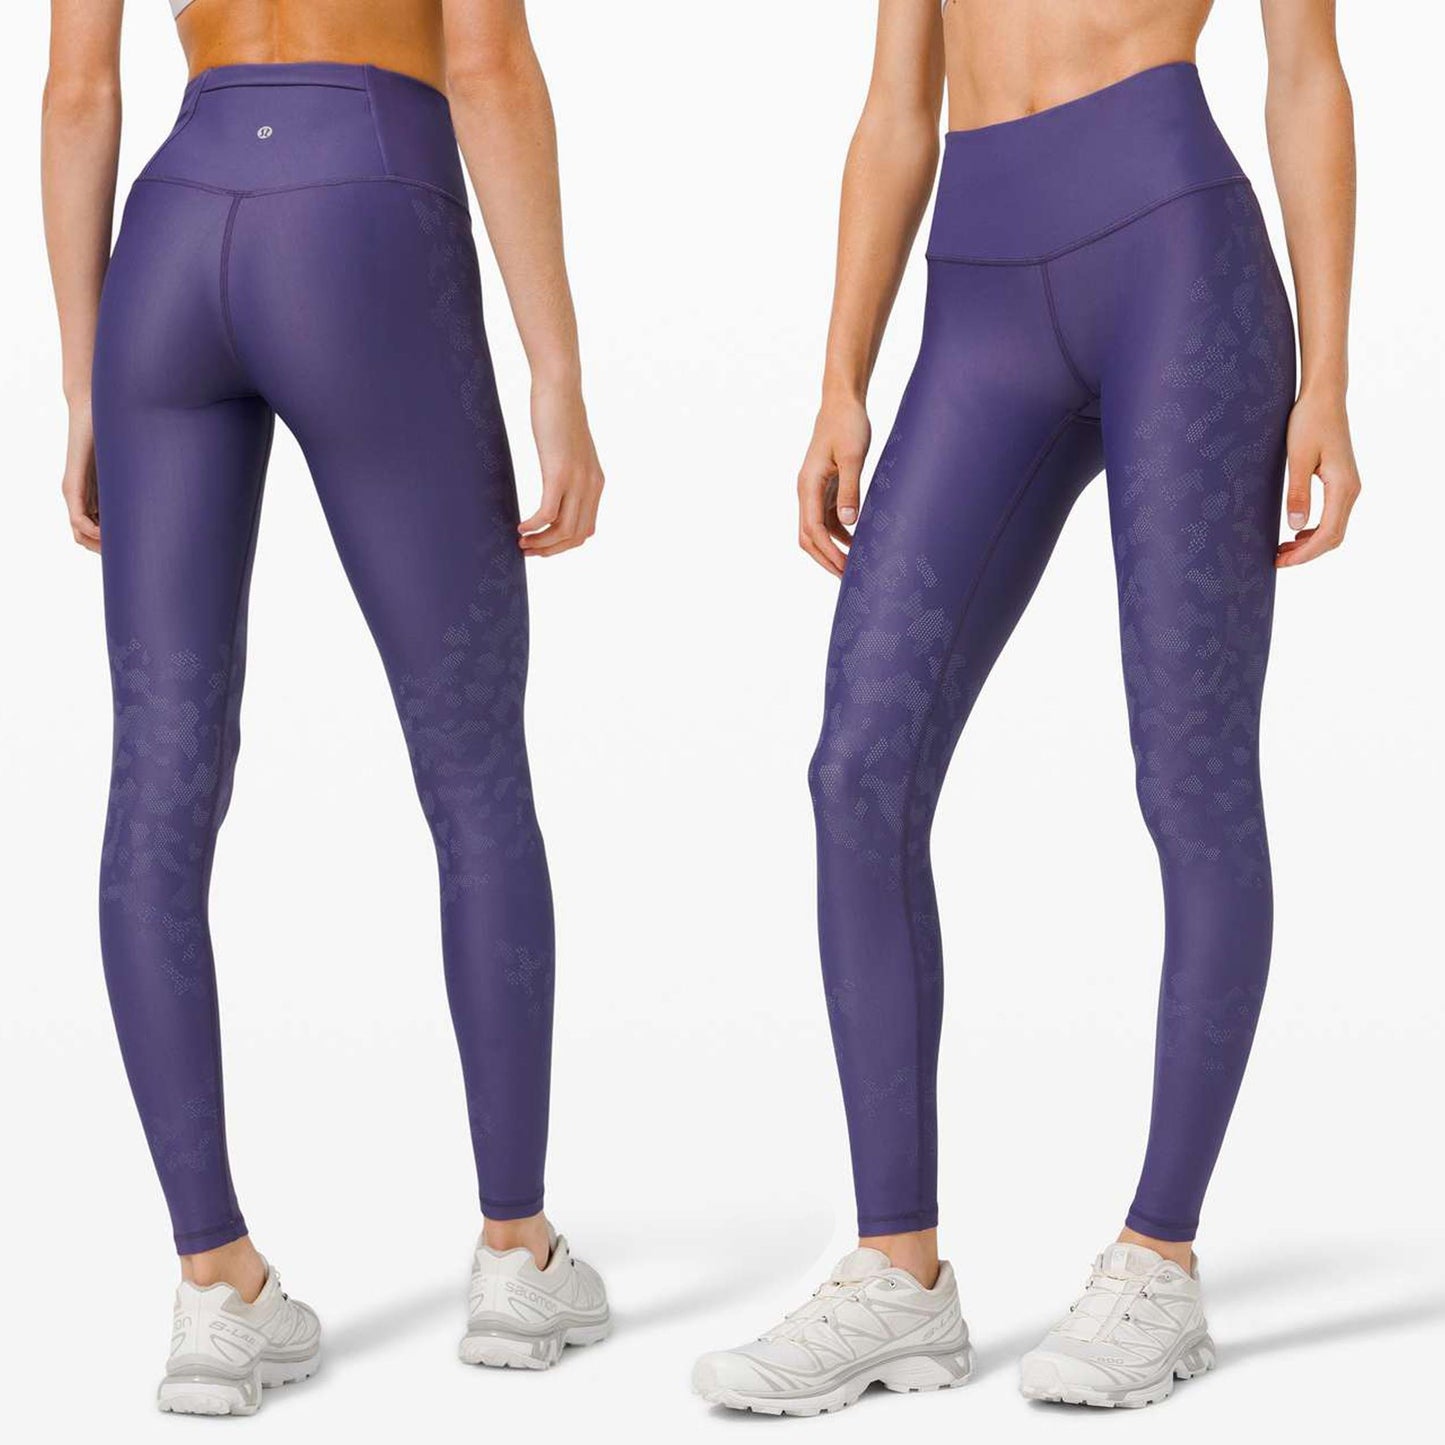 2020 lululemon mapped out high rise 28" tights - size 4